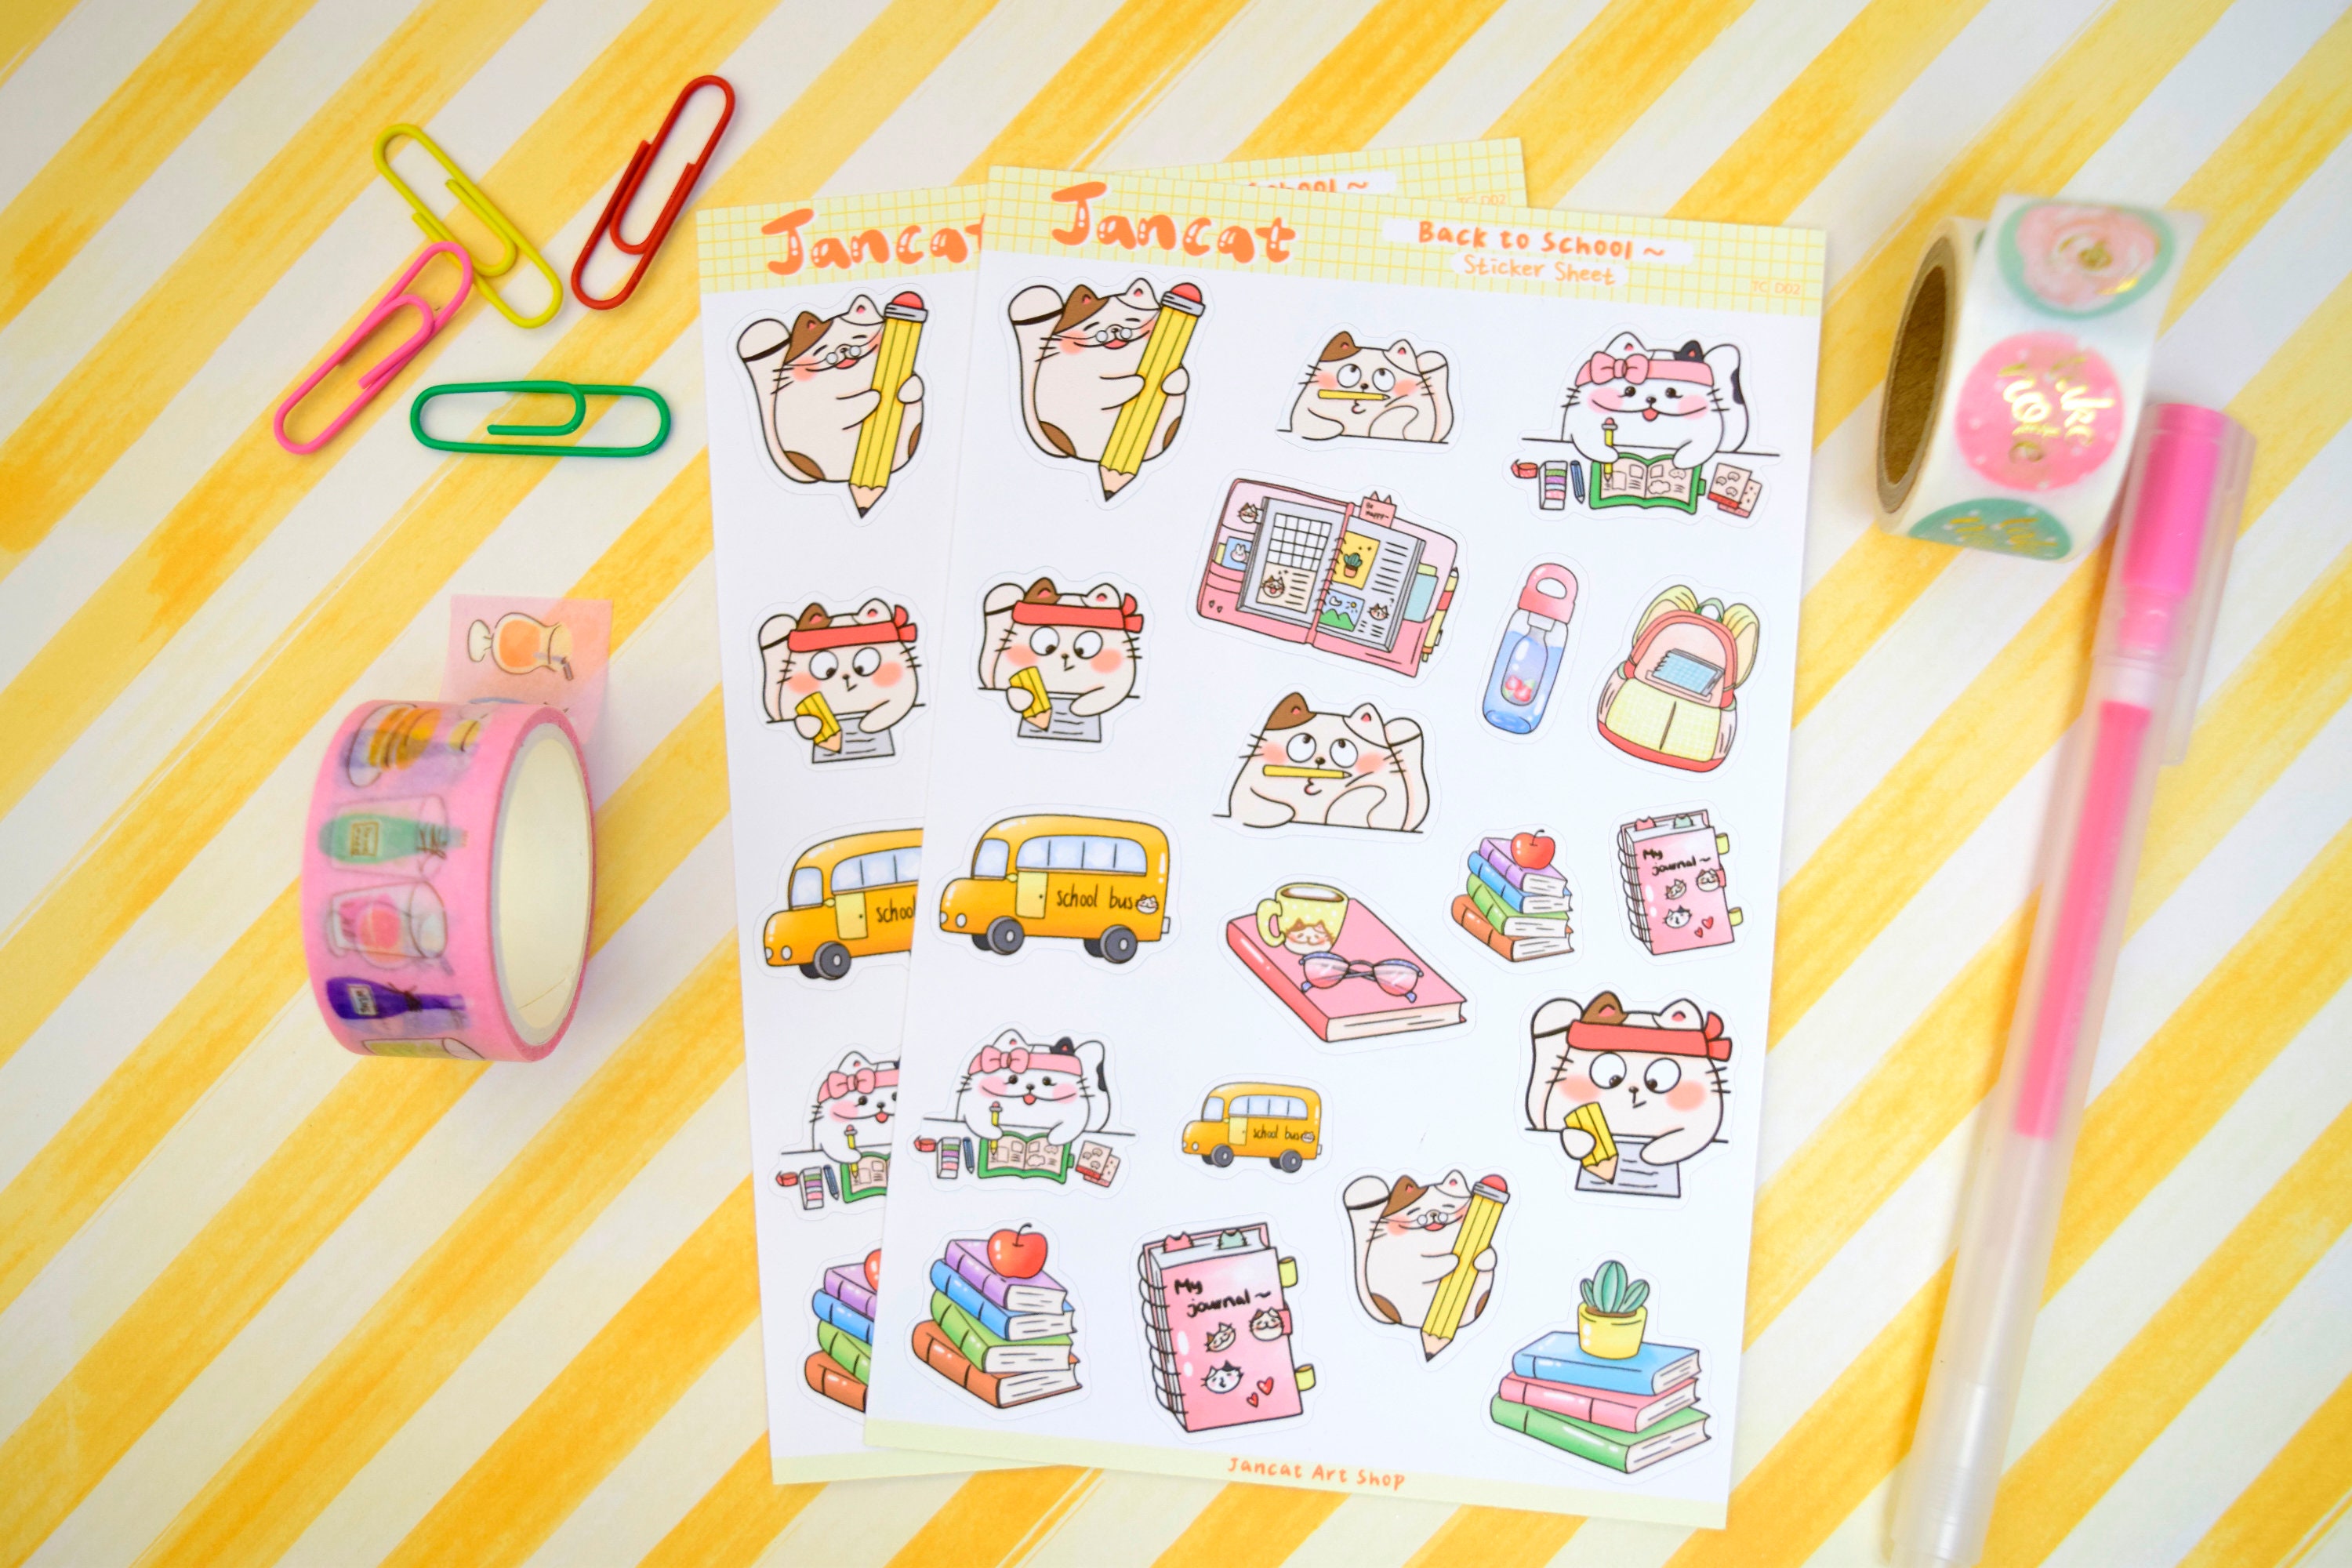 K9-kit Label, Planner Labels, Name Labels, Cute Planner Stickers, Label  Stickers, Sticker Sheet, Emoti Sticker, Back to School Stickers 